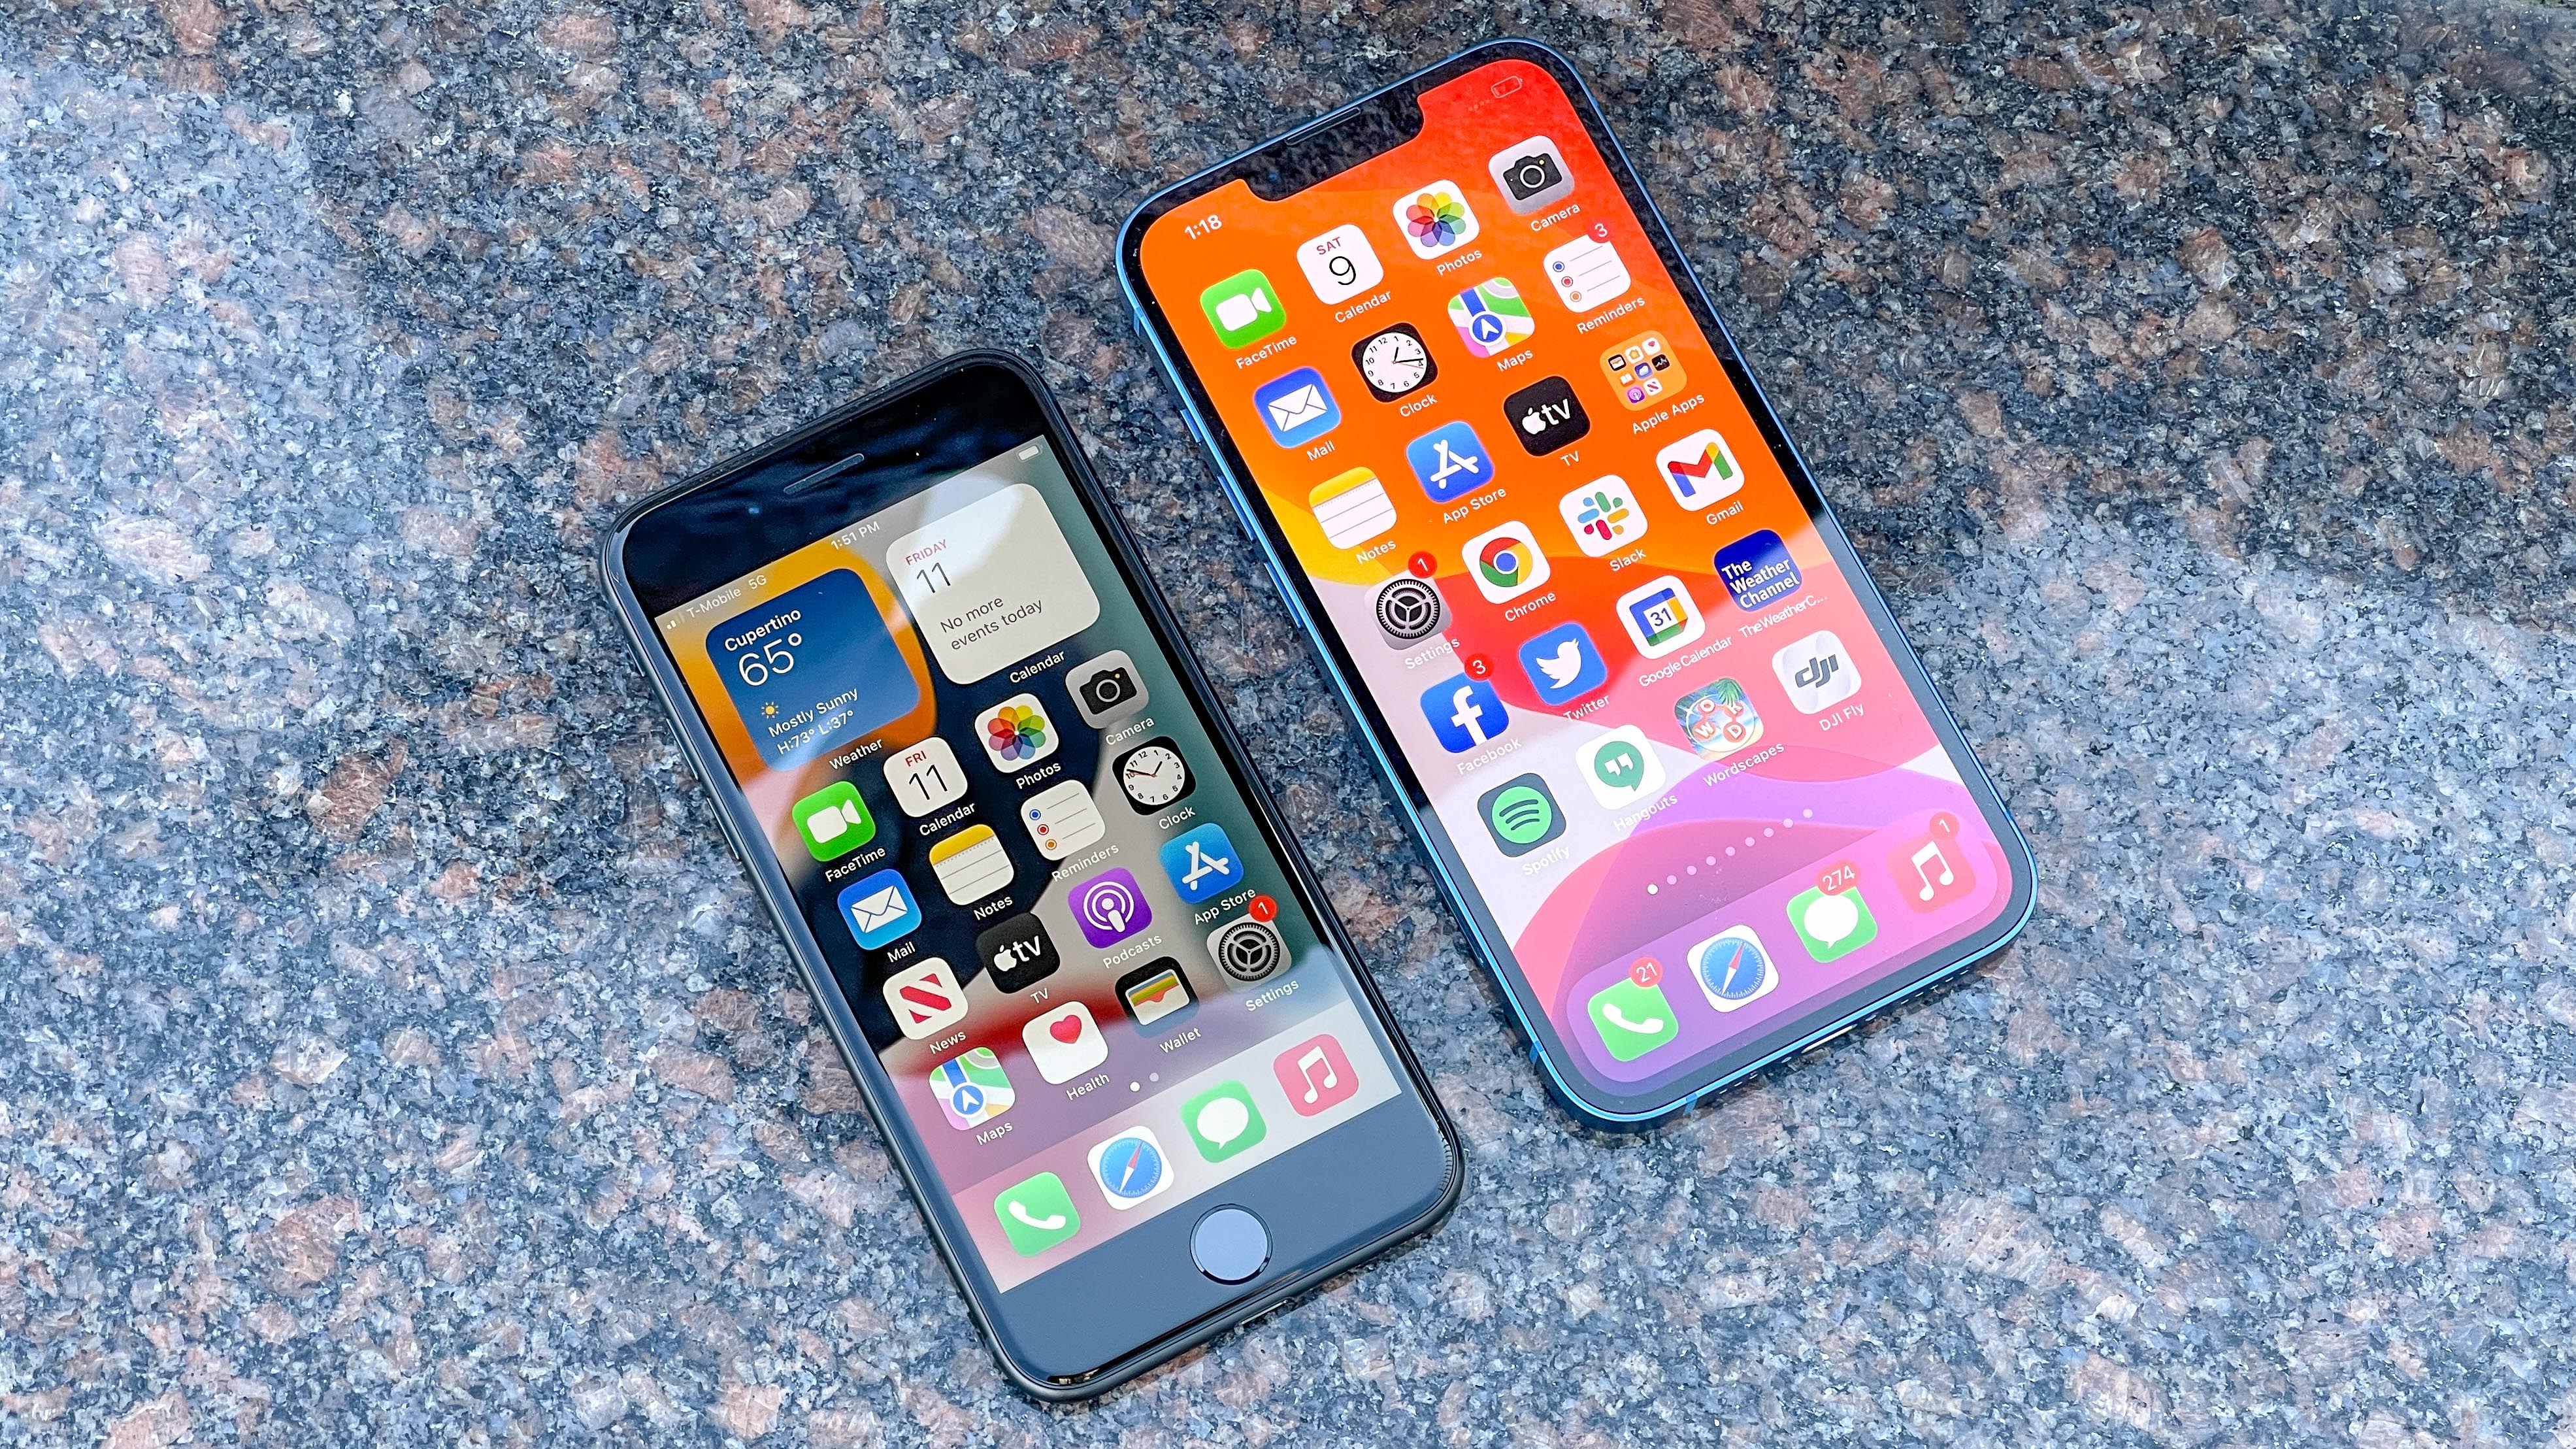 iPhone SE 2022 shown next to iPhone 13